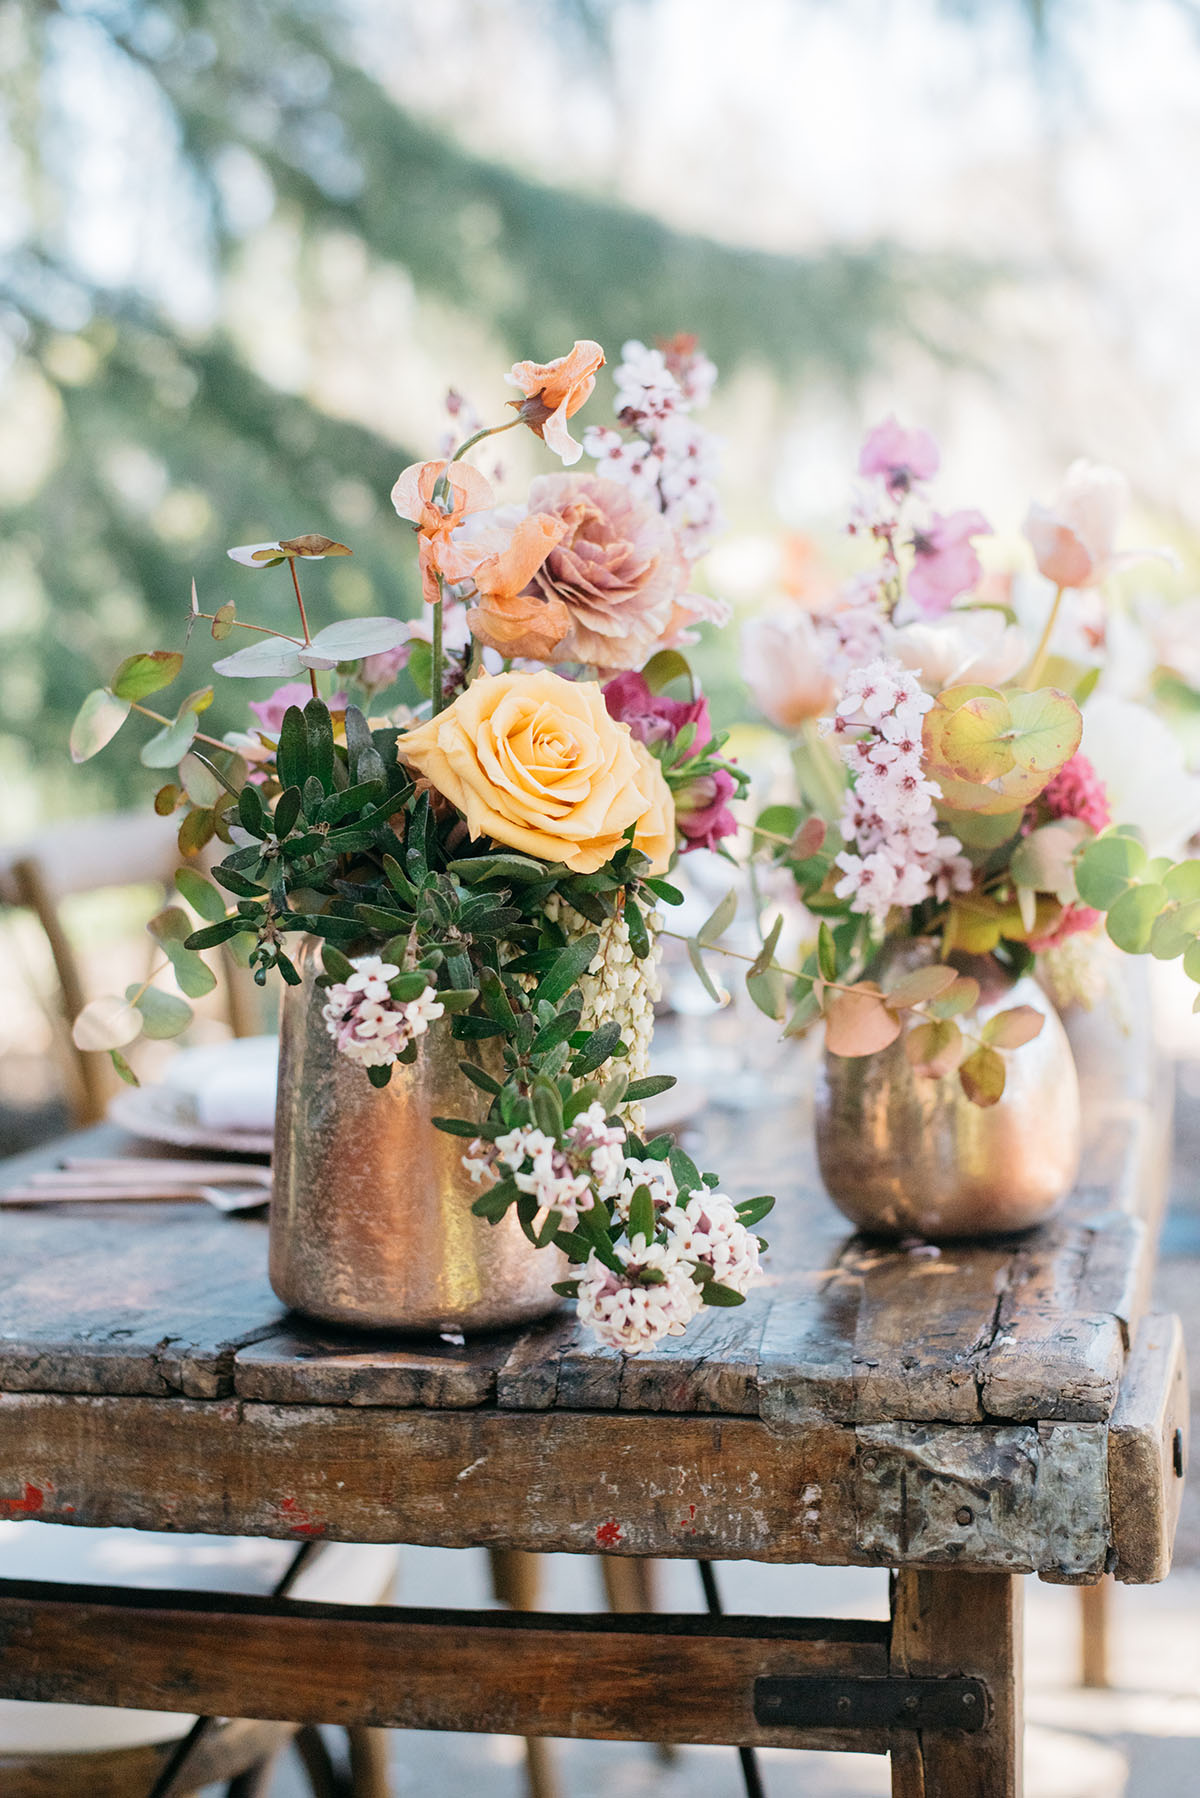 Moody floral fairy tale wedding inspiration with fashion from three eras contemporary vintage modern trans wedding looks dresses hair makeup bridal beauty LGBTQ+ flowers